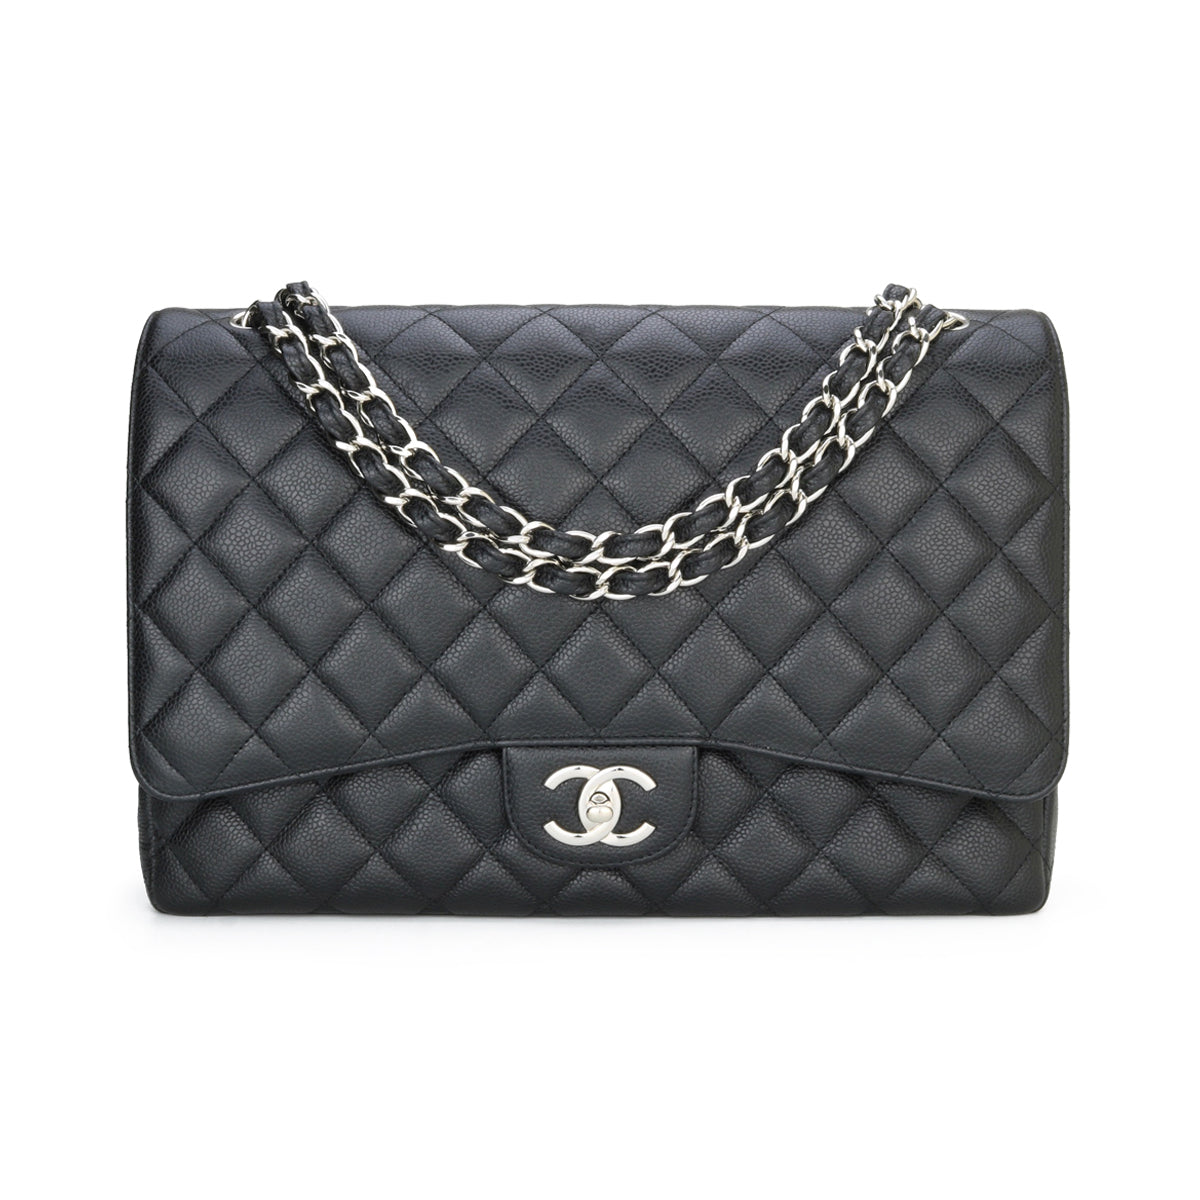 FIRE PRICE* Chanel Silver Metallic Classic Maxi Double Flap Bag in